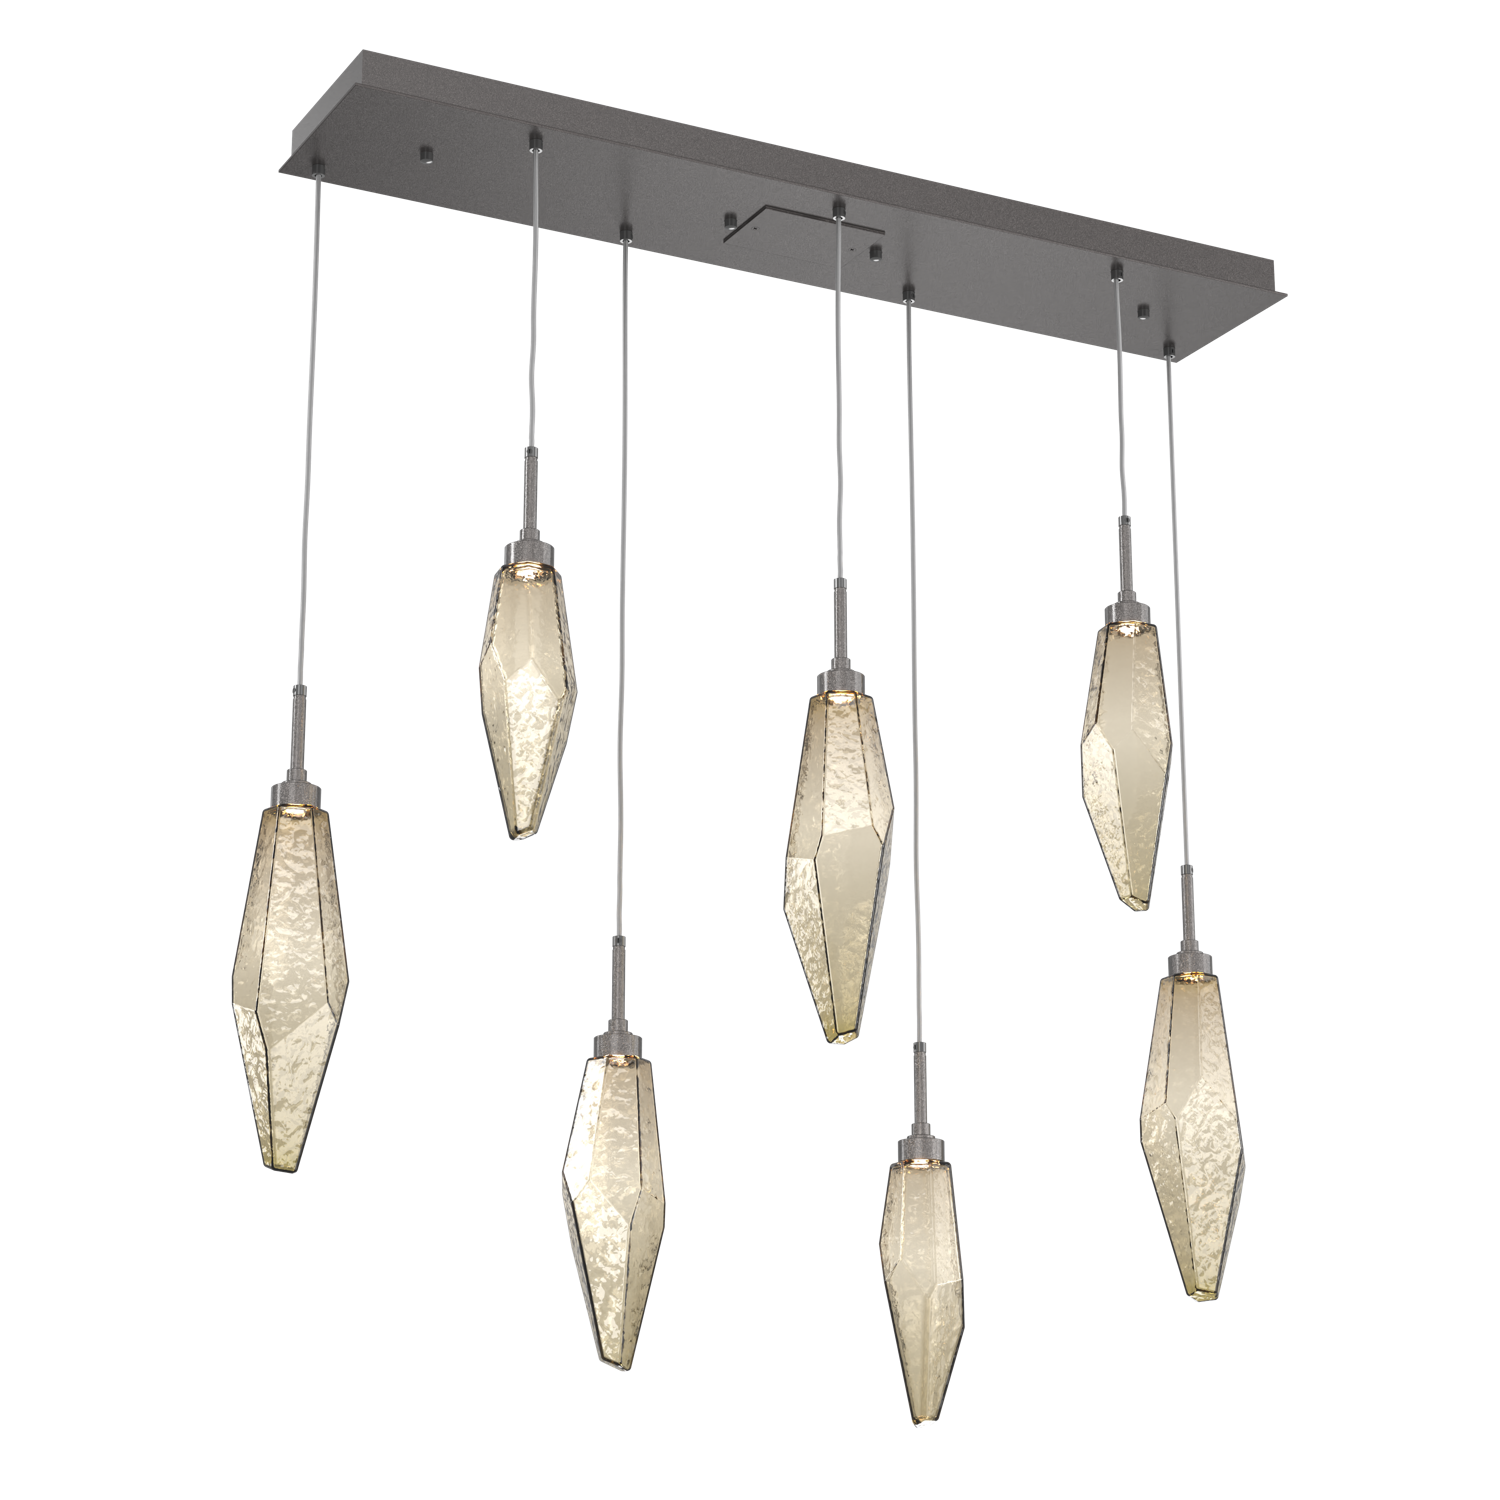 PLB0050-07-GP-CB-Hammerton-Studio-Rock-Crystal-7-light-linear-pendant-chandelier-with-graphite-finish-and-chilled-bronze-blown-glass-shades-and-LED-lamping